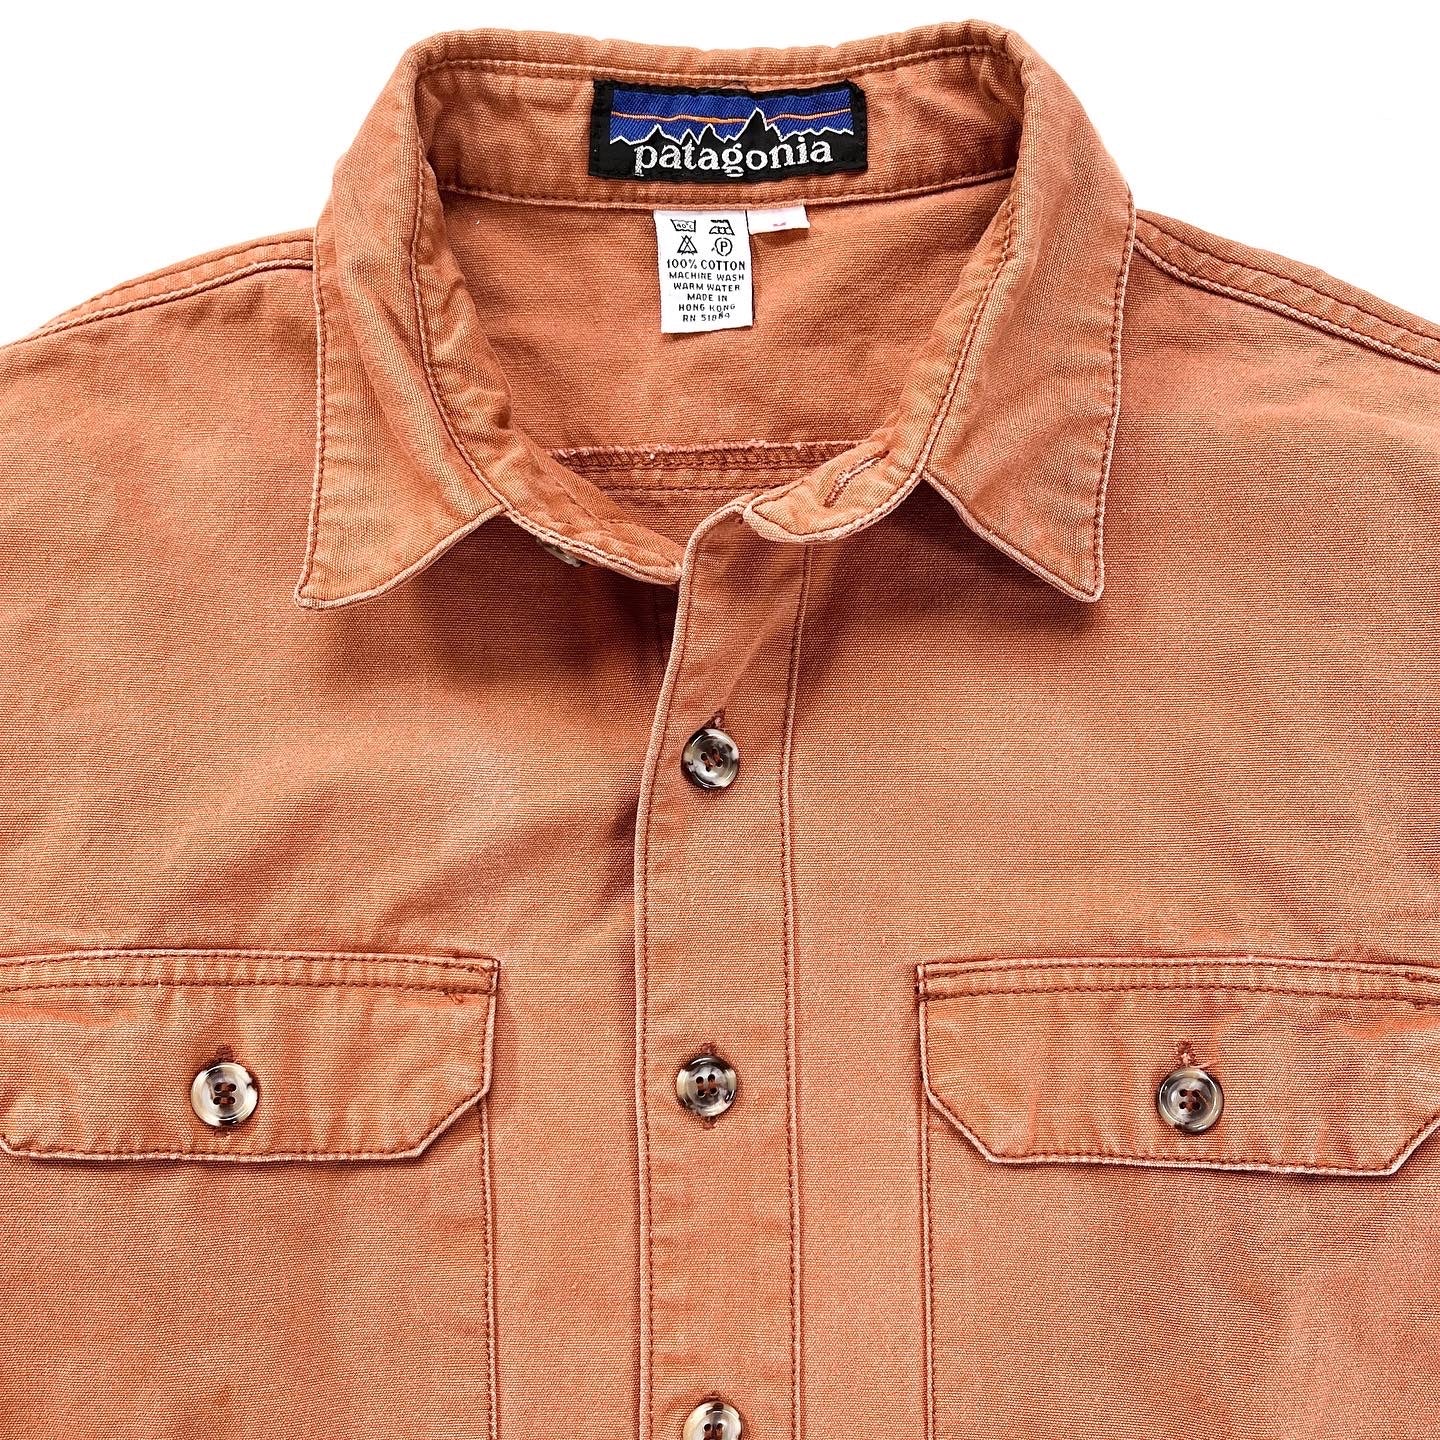 1980s Patagonia Garment Dyed Cotton Canvas Shirt, Clay (S/M)